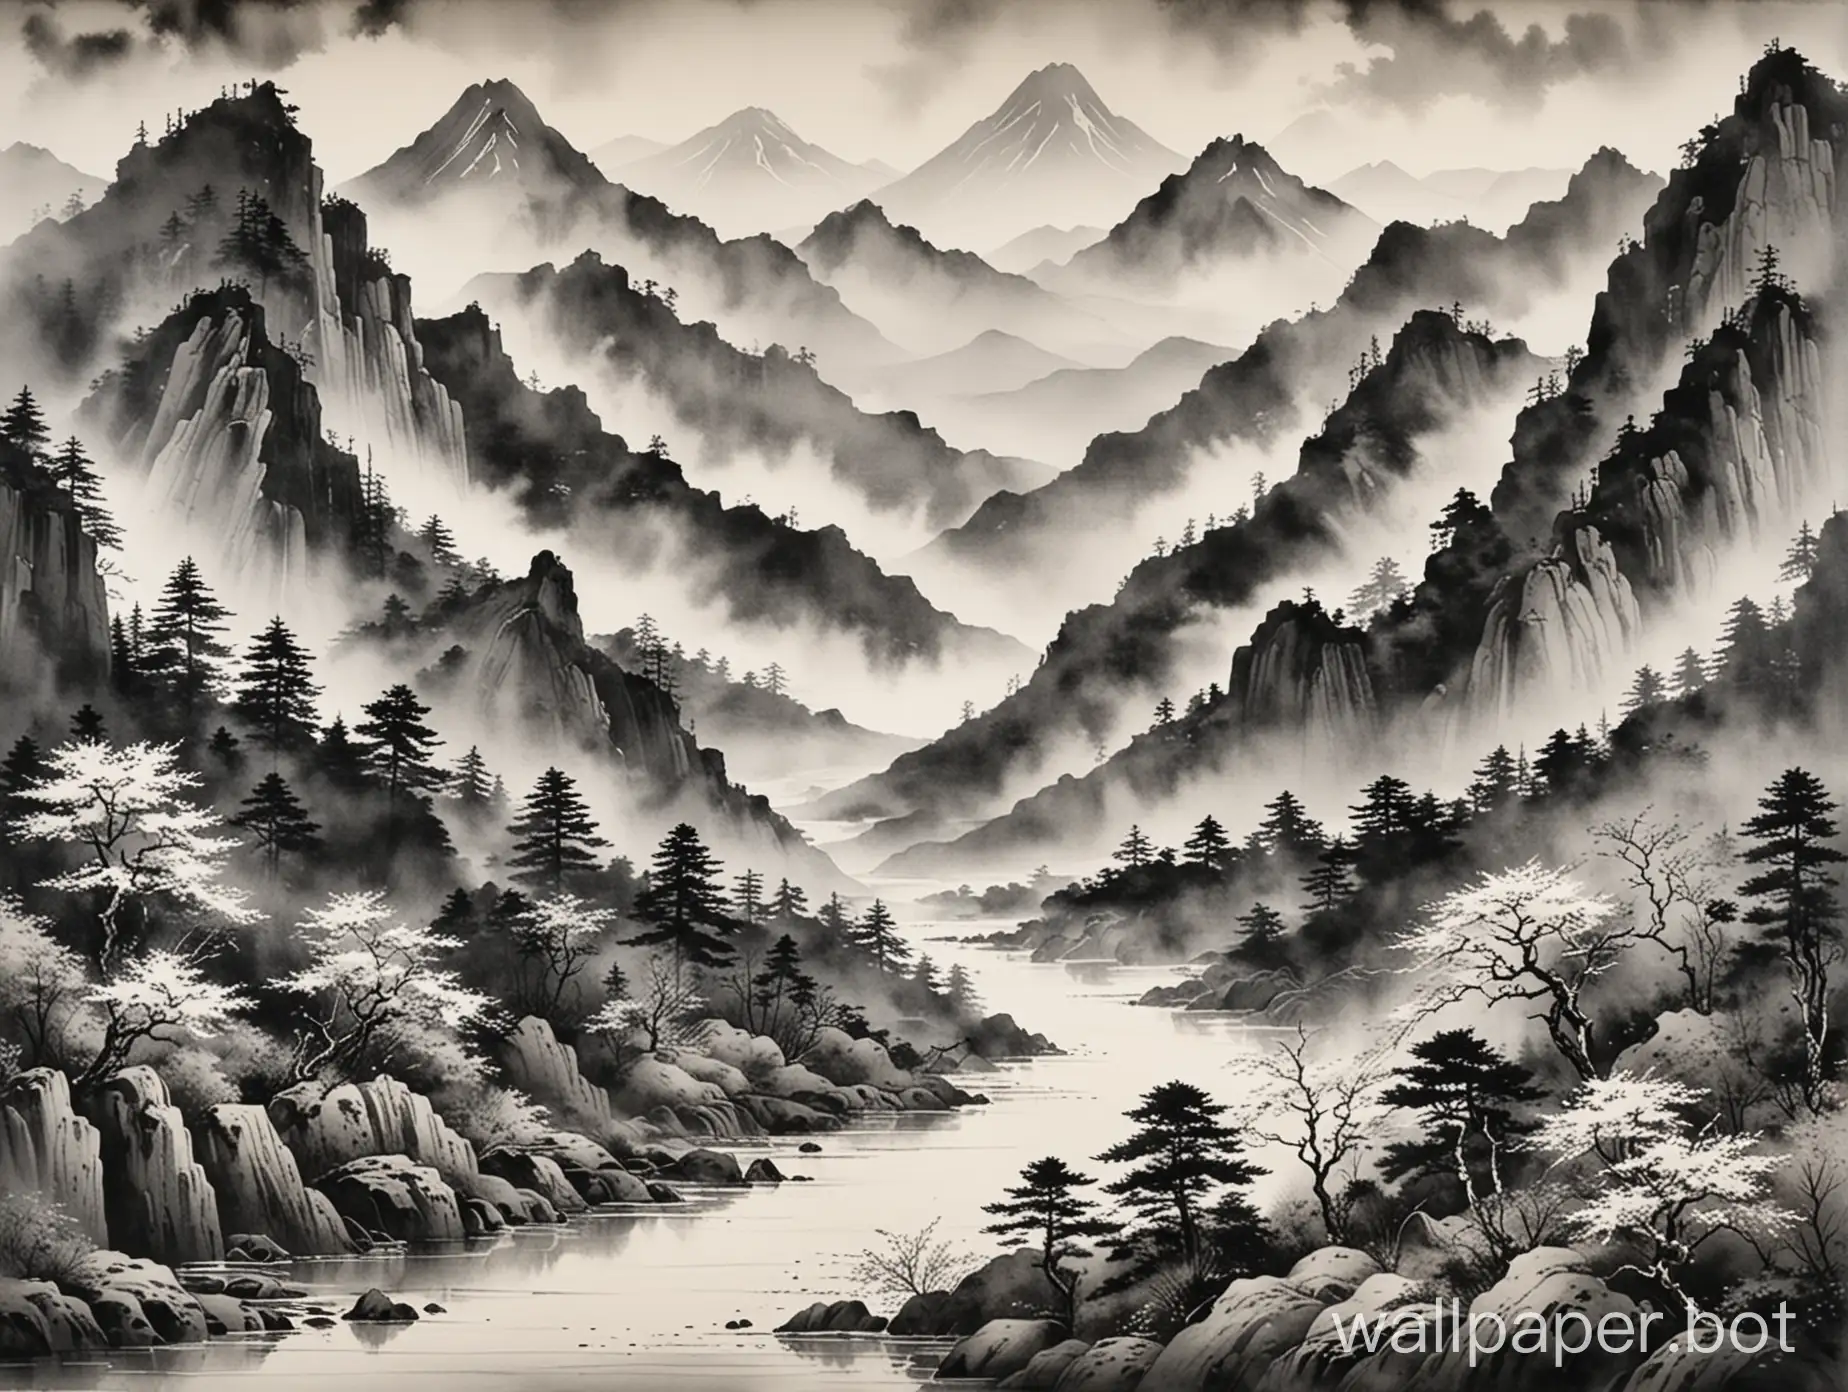 Japanese-Watercolor-Painting-of-Mountains-in-Black-and-White